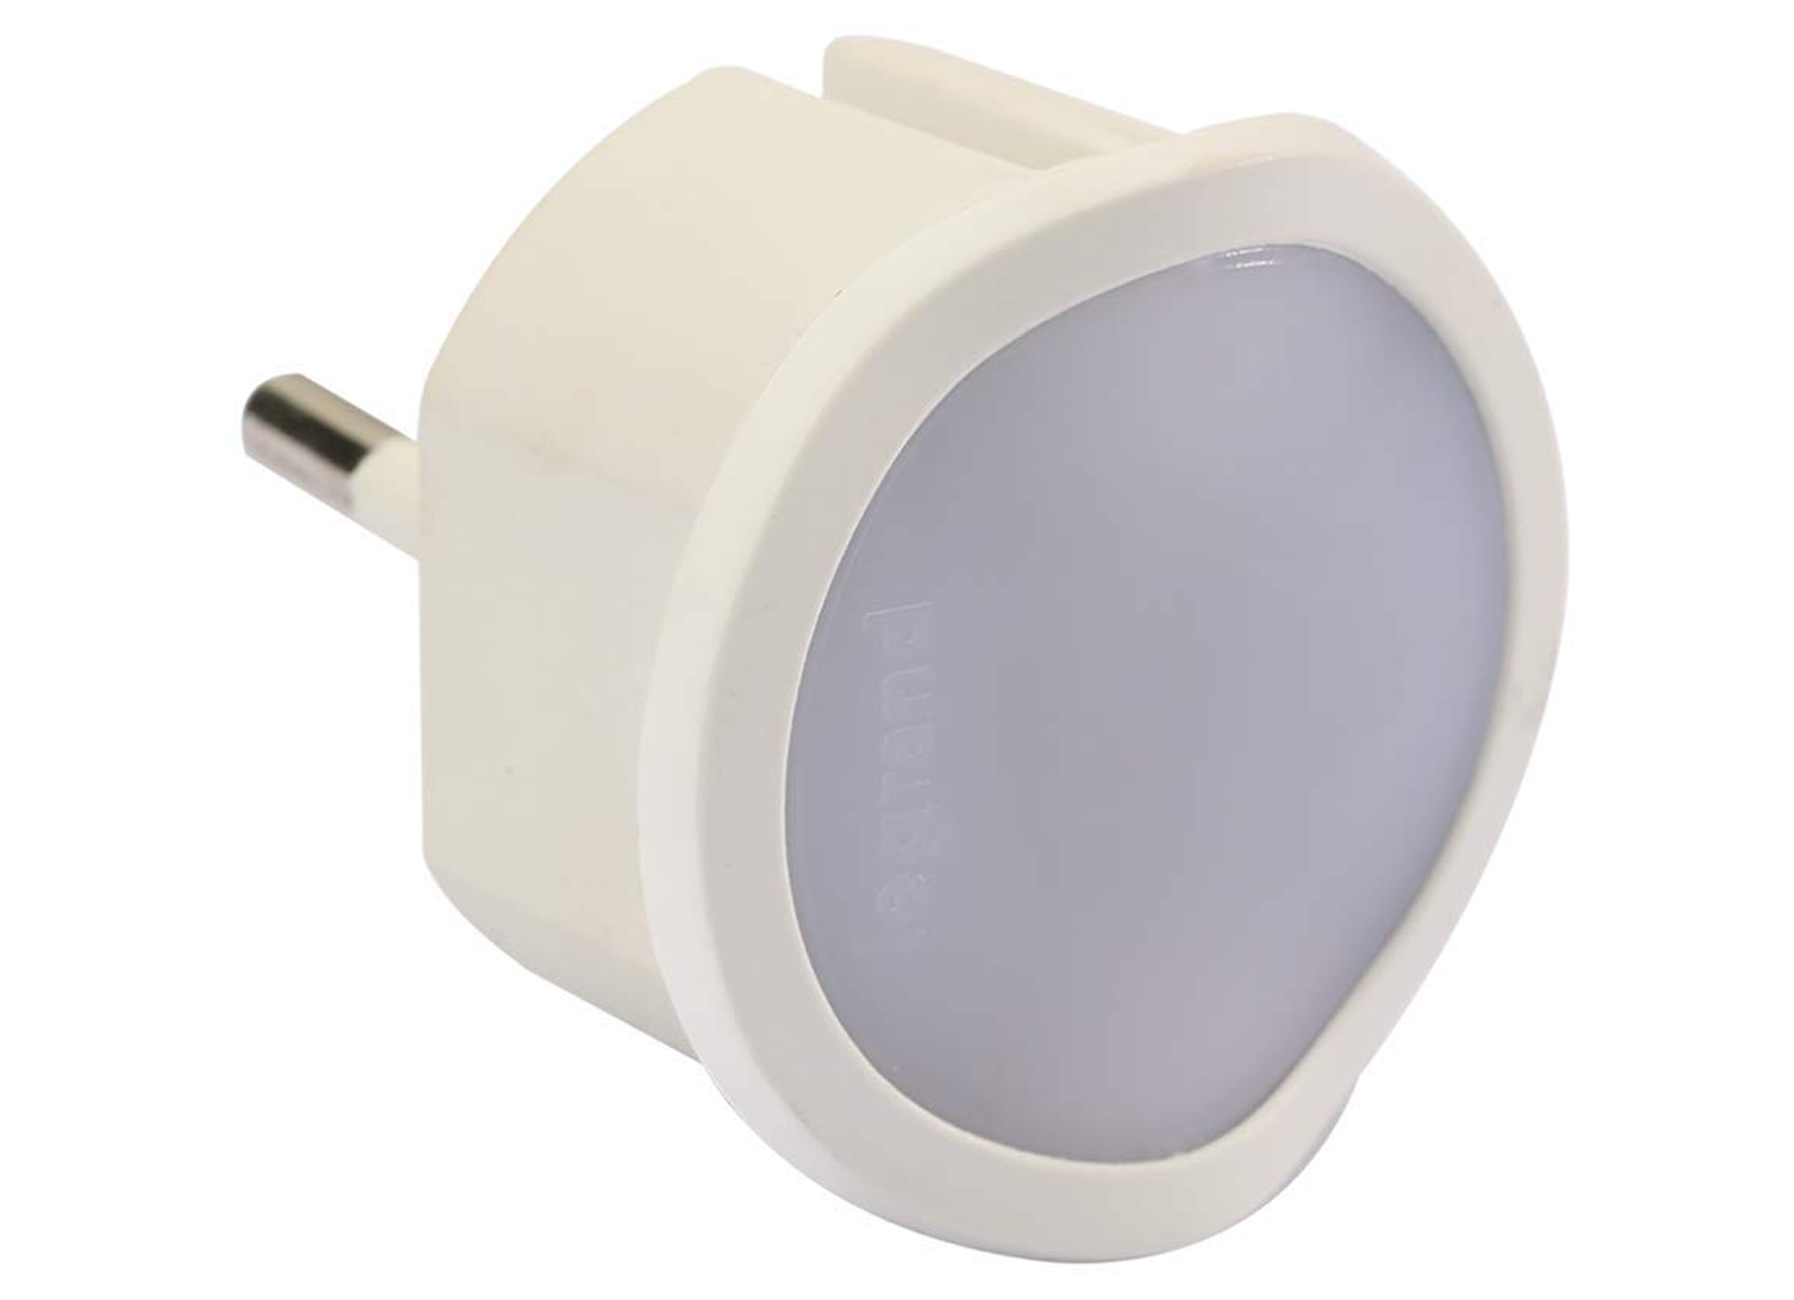 VEILLEUSE LED DIMMABLE 2P 10A BLANC